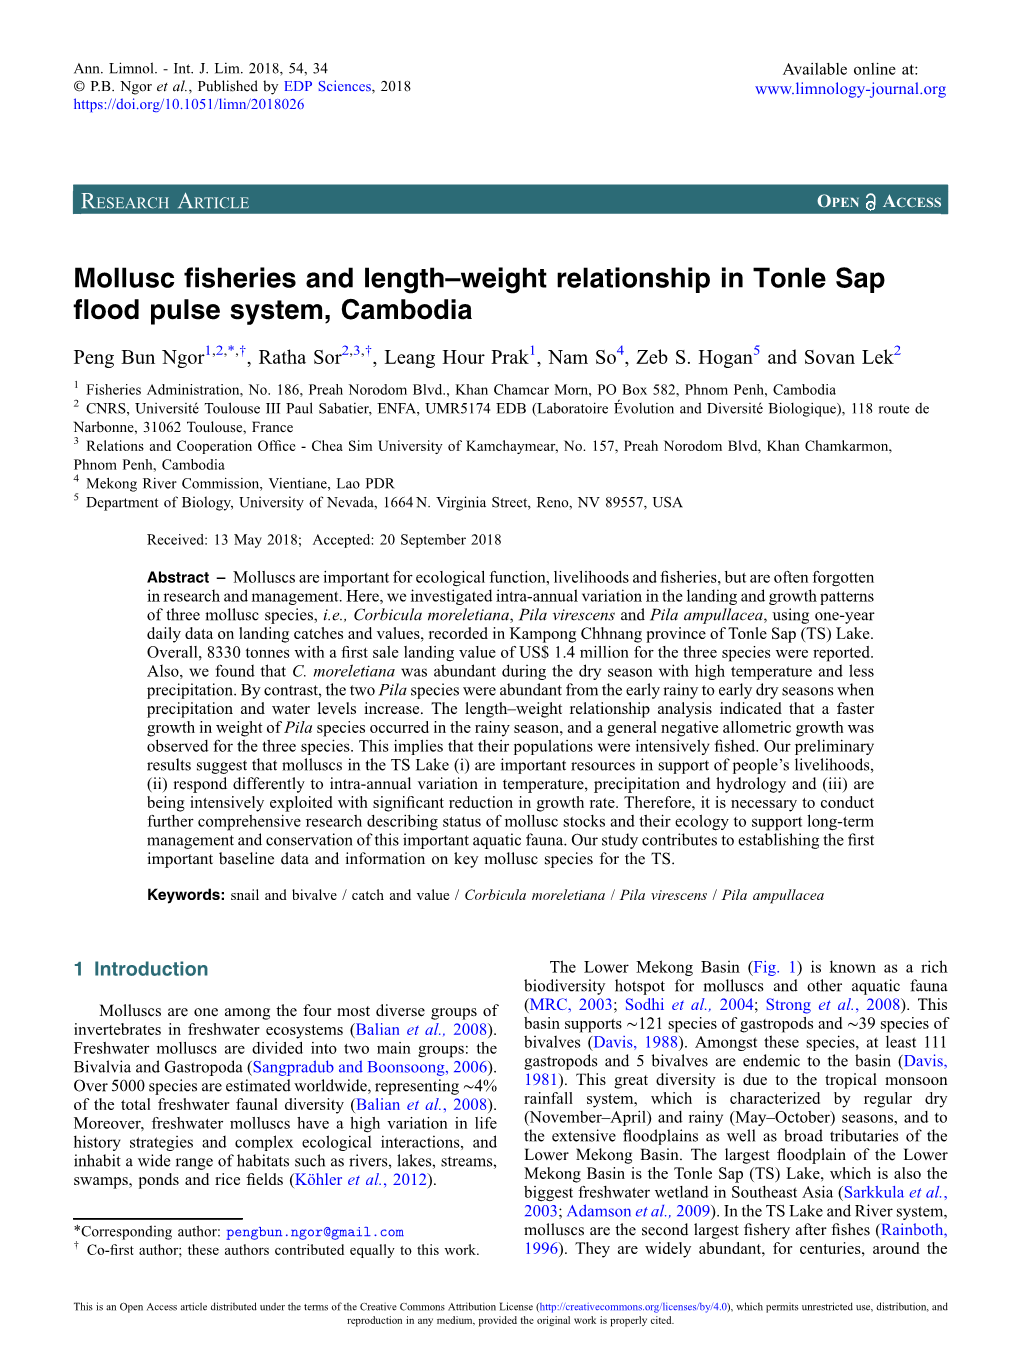 Mollusc Fisheries and Length–Weight Relationship in Tonle Sap Flood